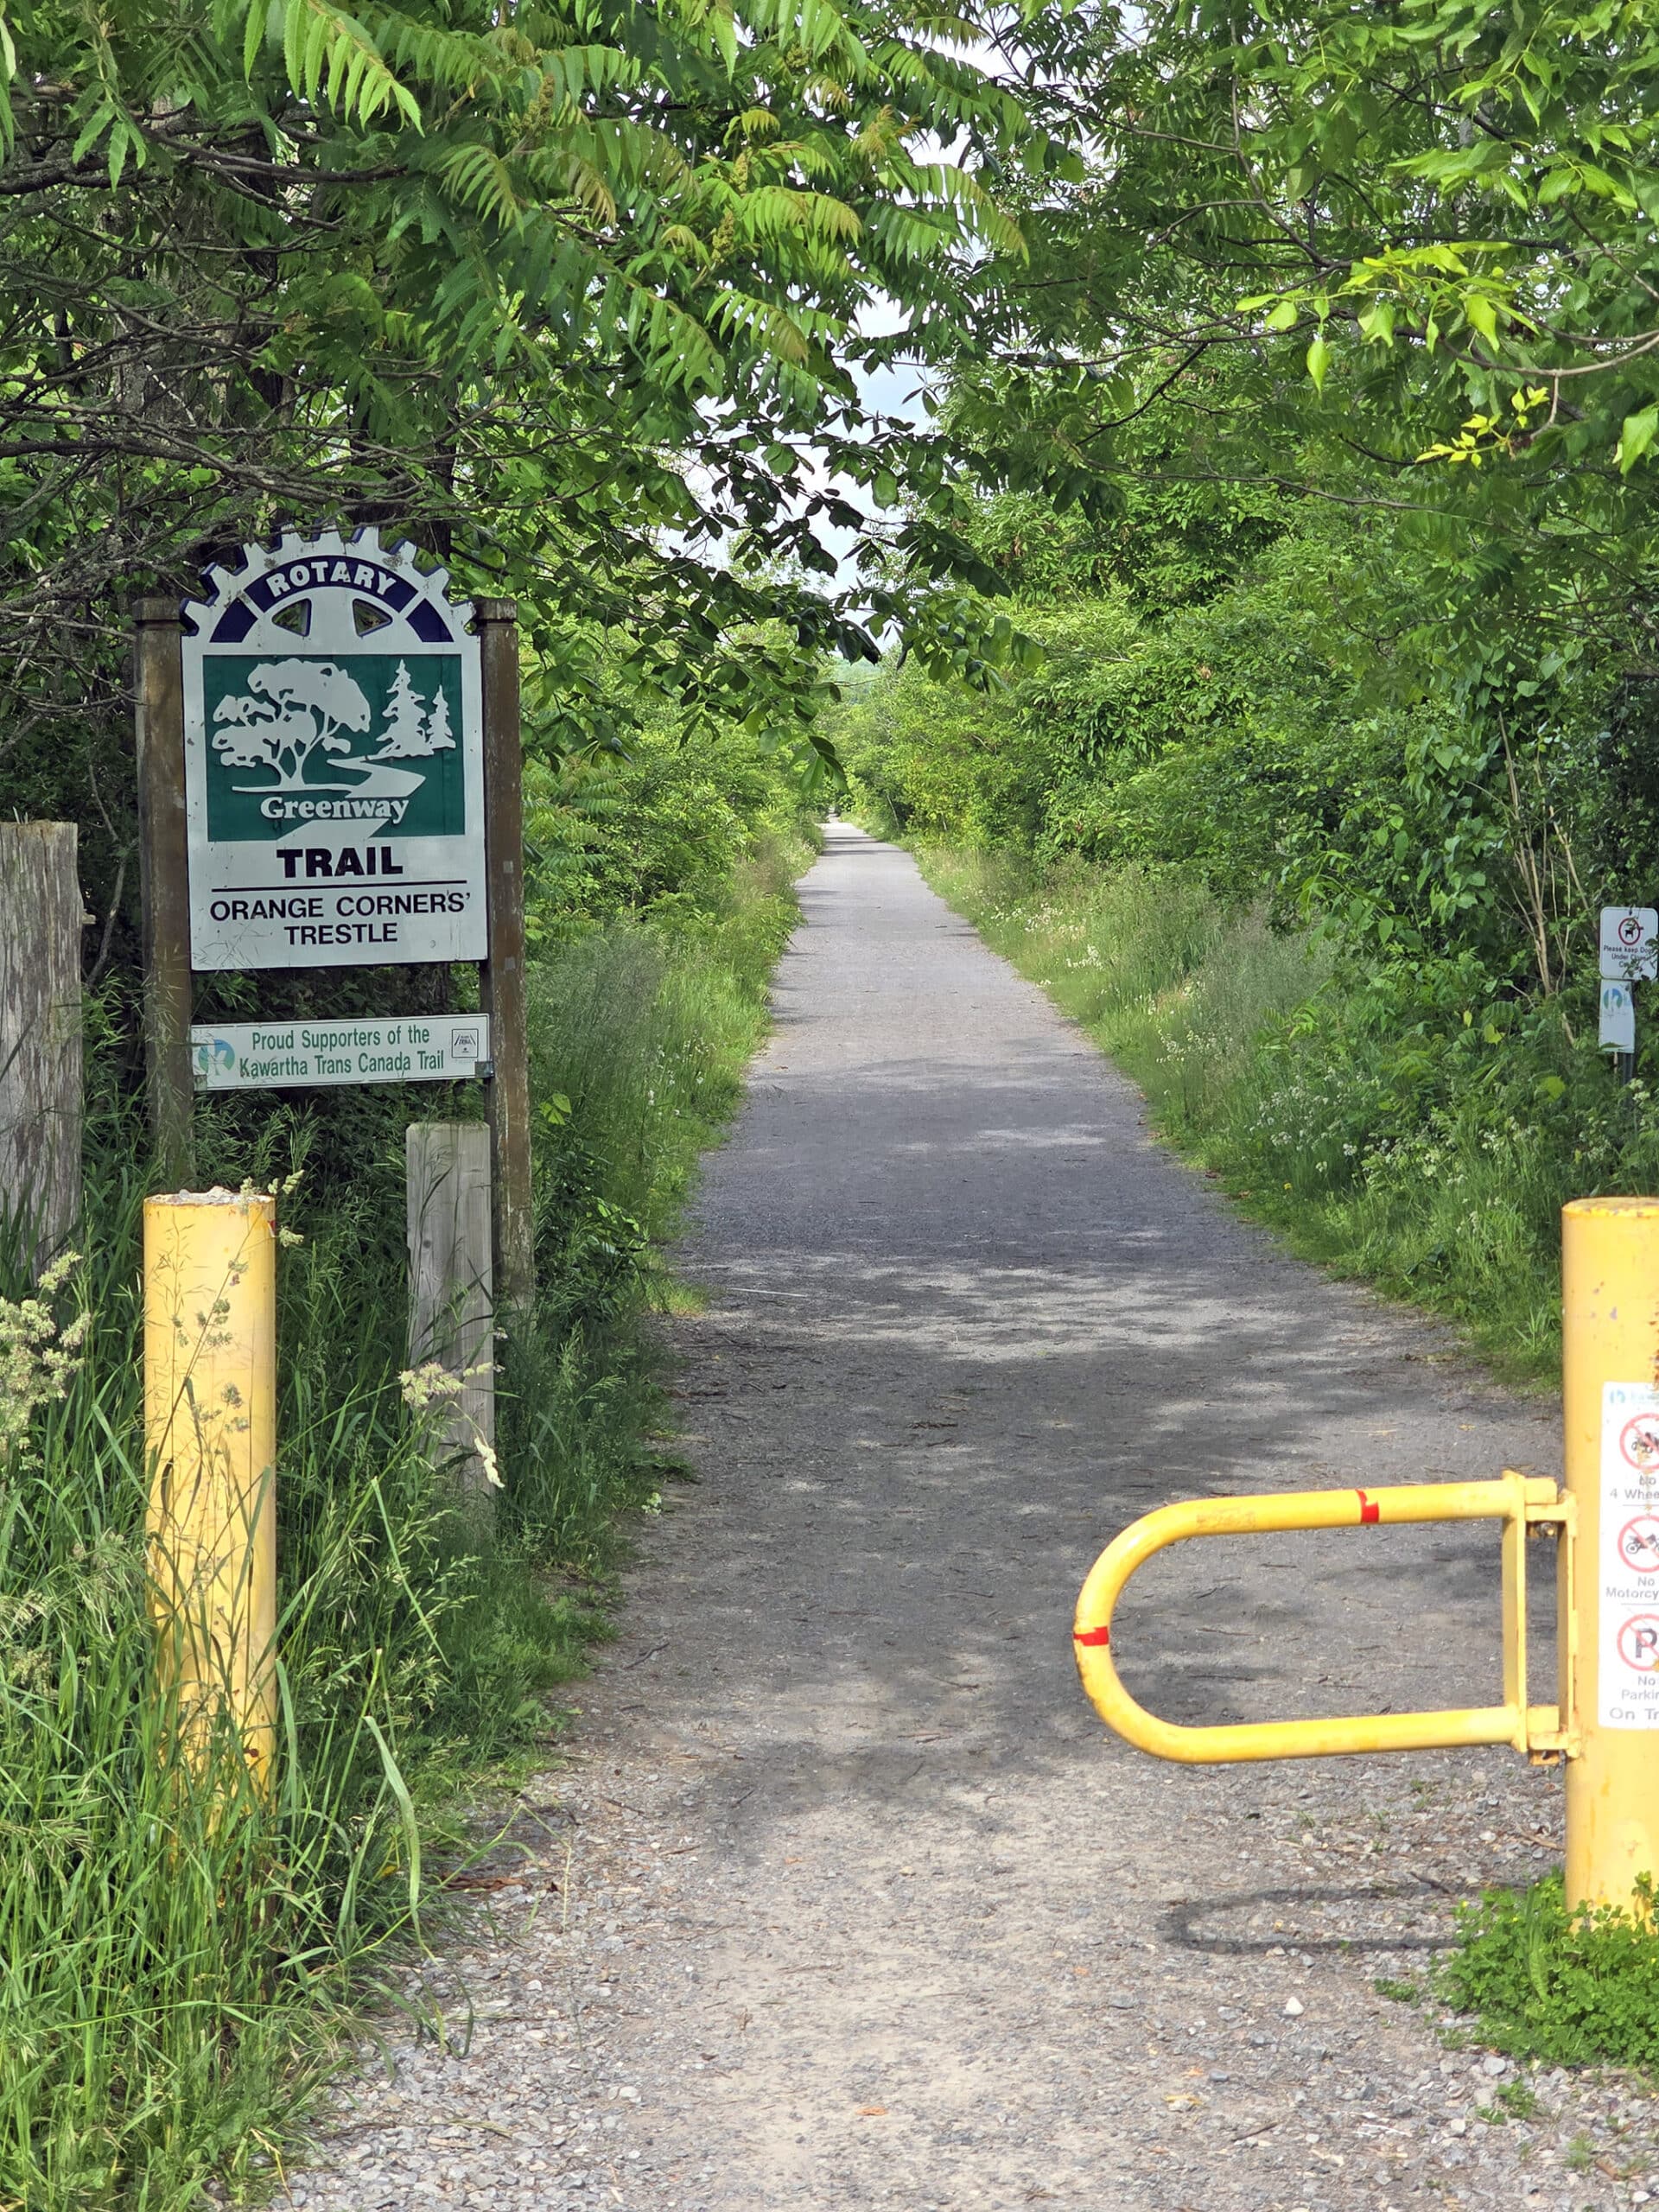 A trail extending into the distance.  In the foreground is the trail entrance, with a decorative sign.